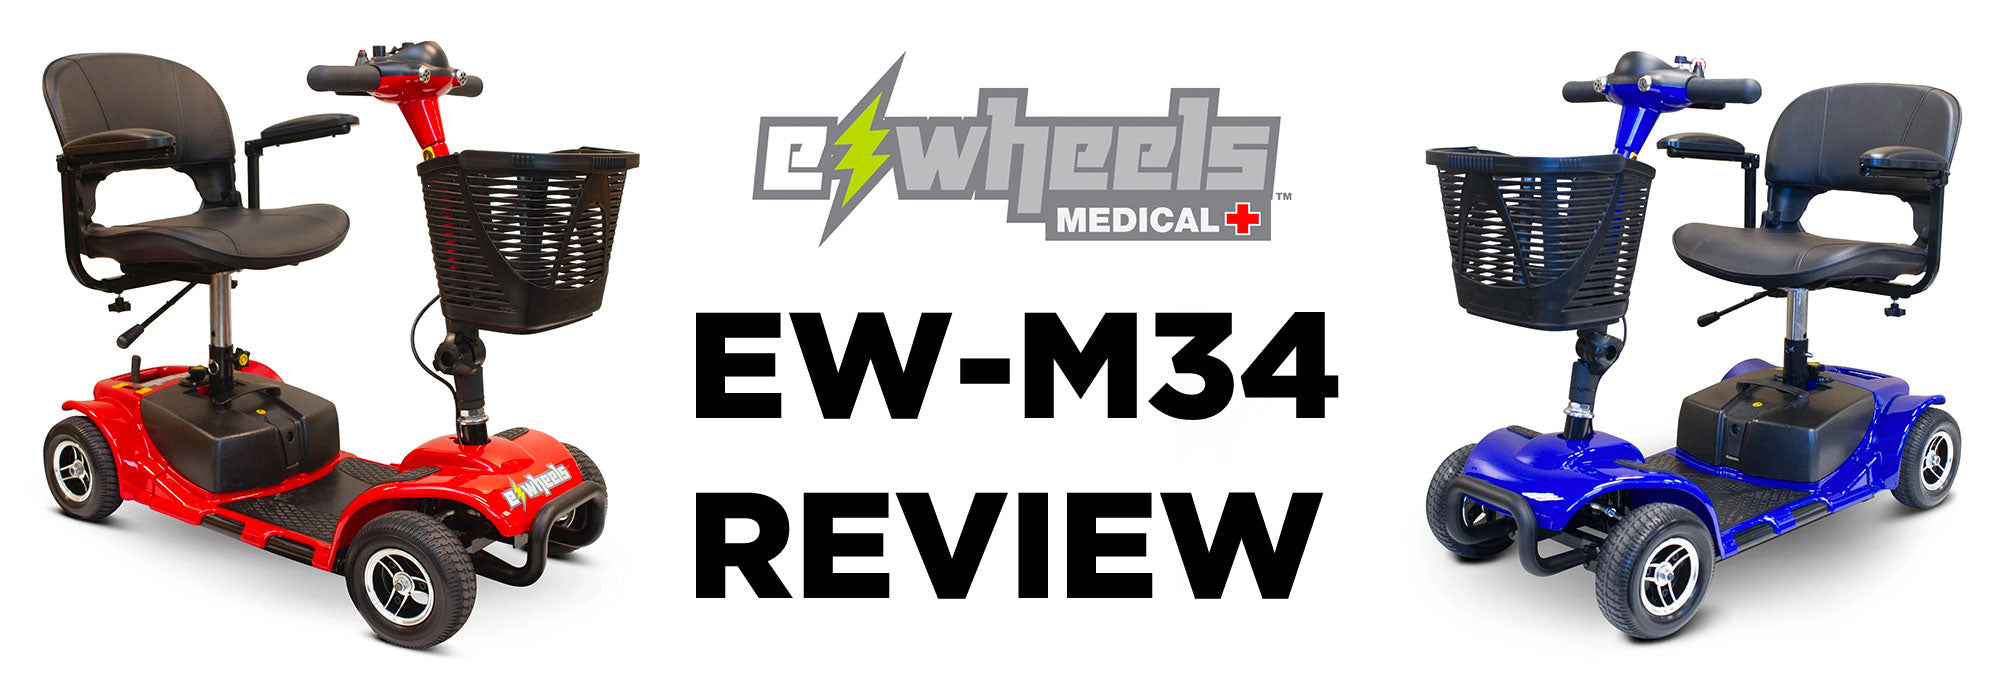 udskiftelig Tilpasning Piping EWheels EW-M34 Mobility Scooter Review – Best Power Wheelchair